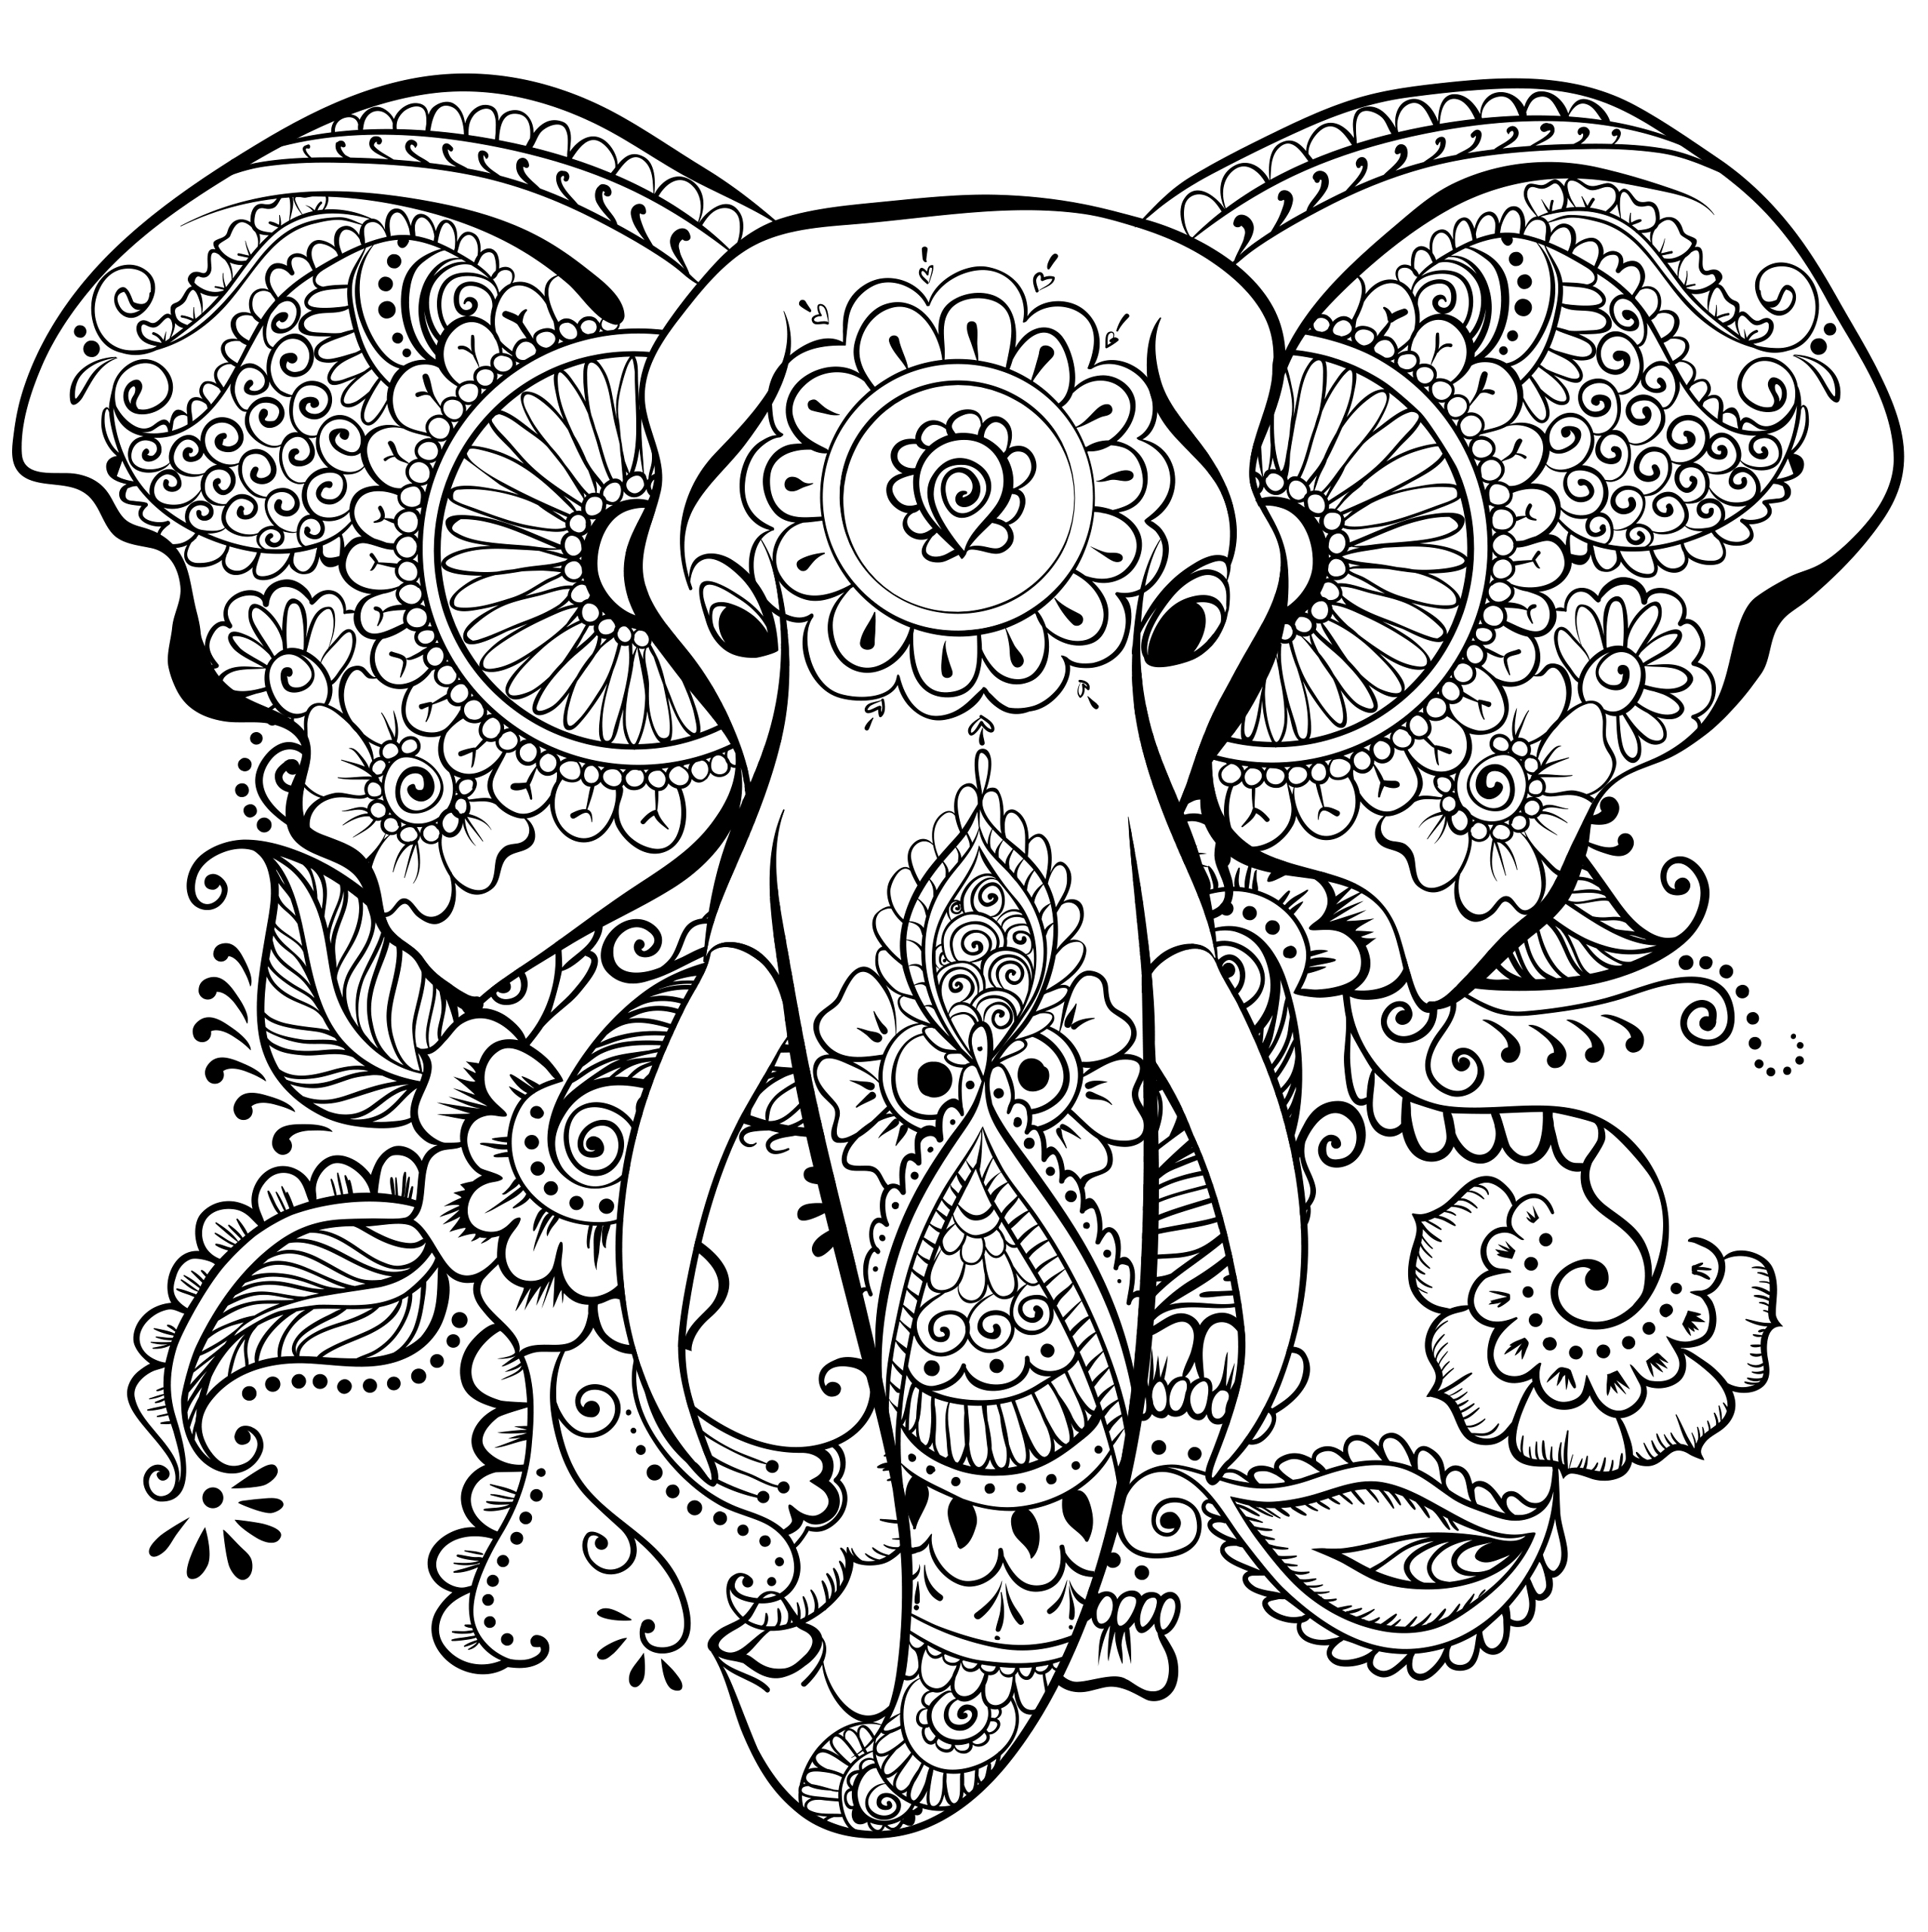 63 Adult Coloring Pages To Nourish Your Mental - Visual  